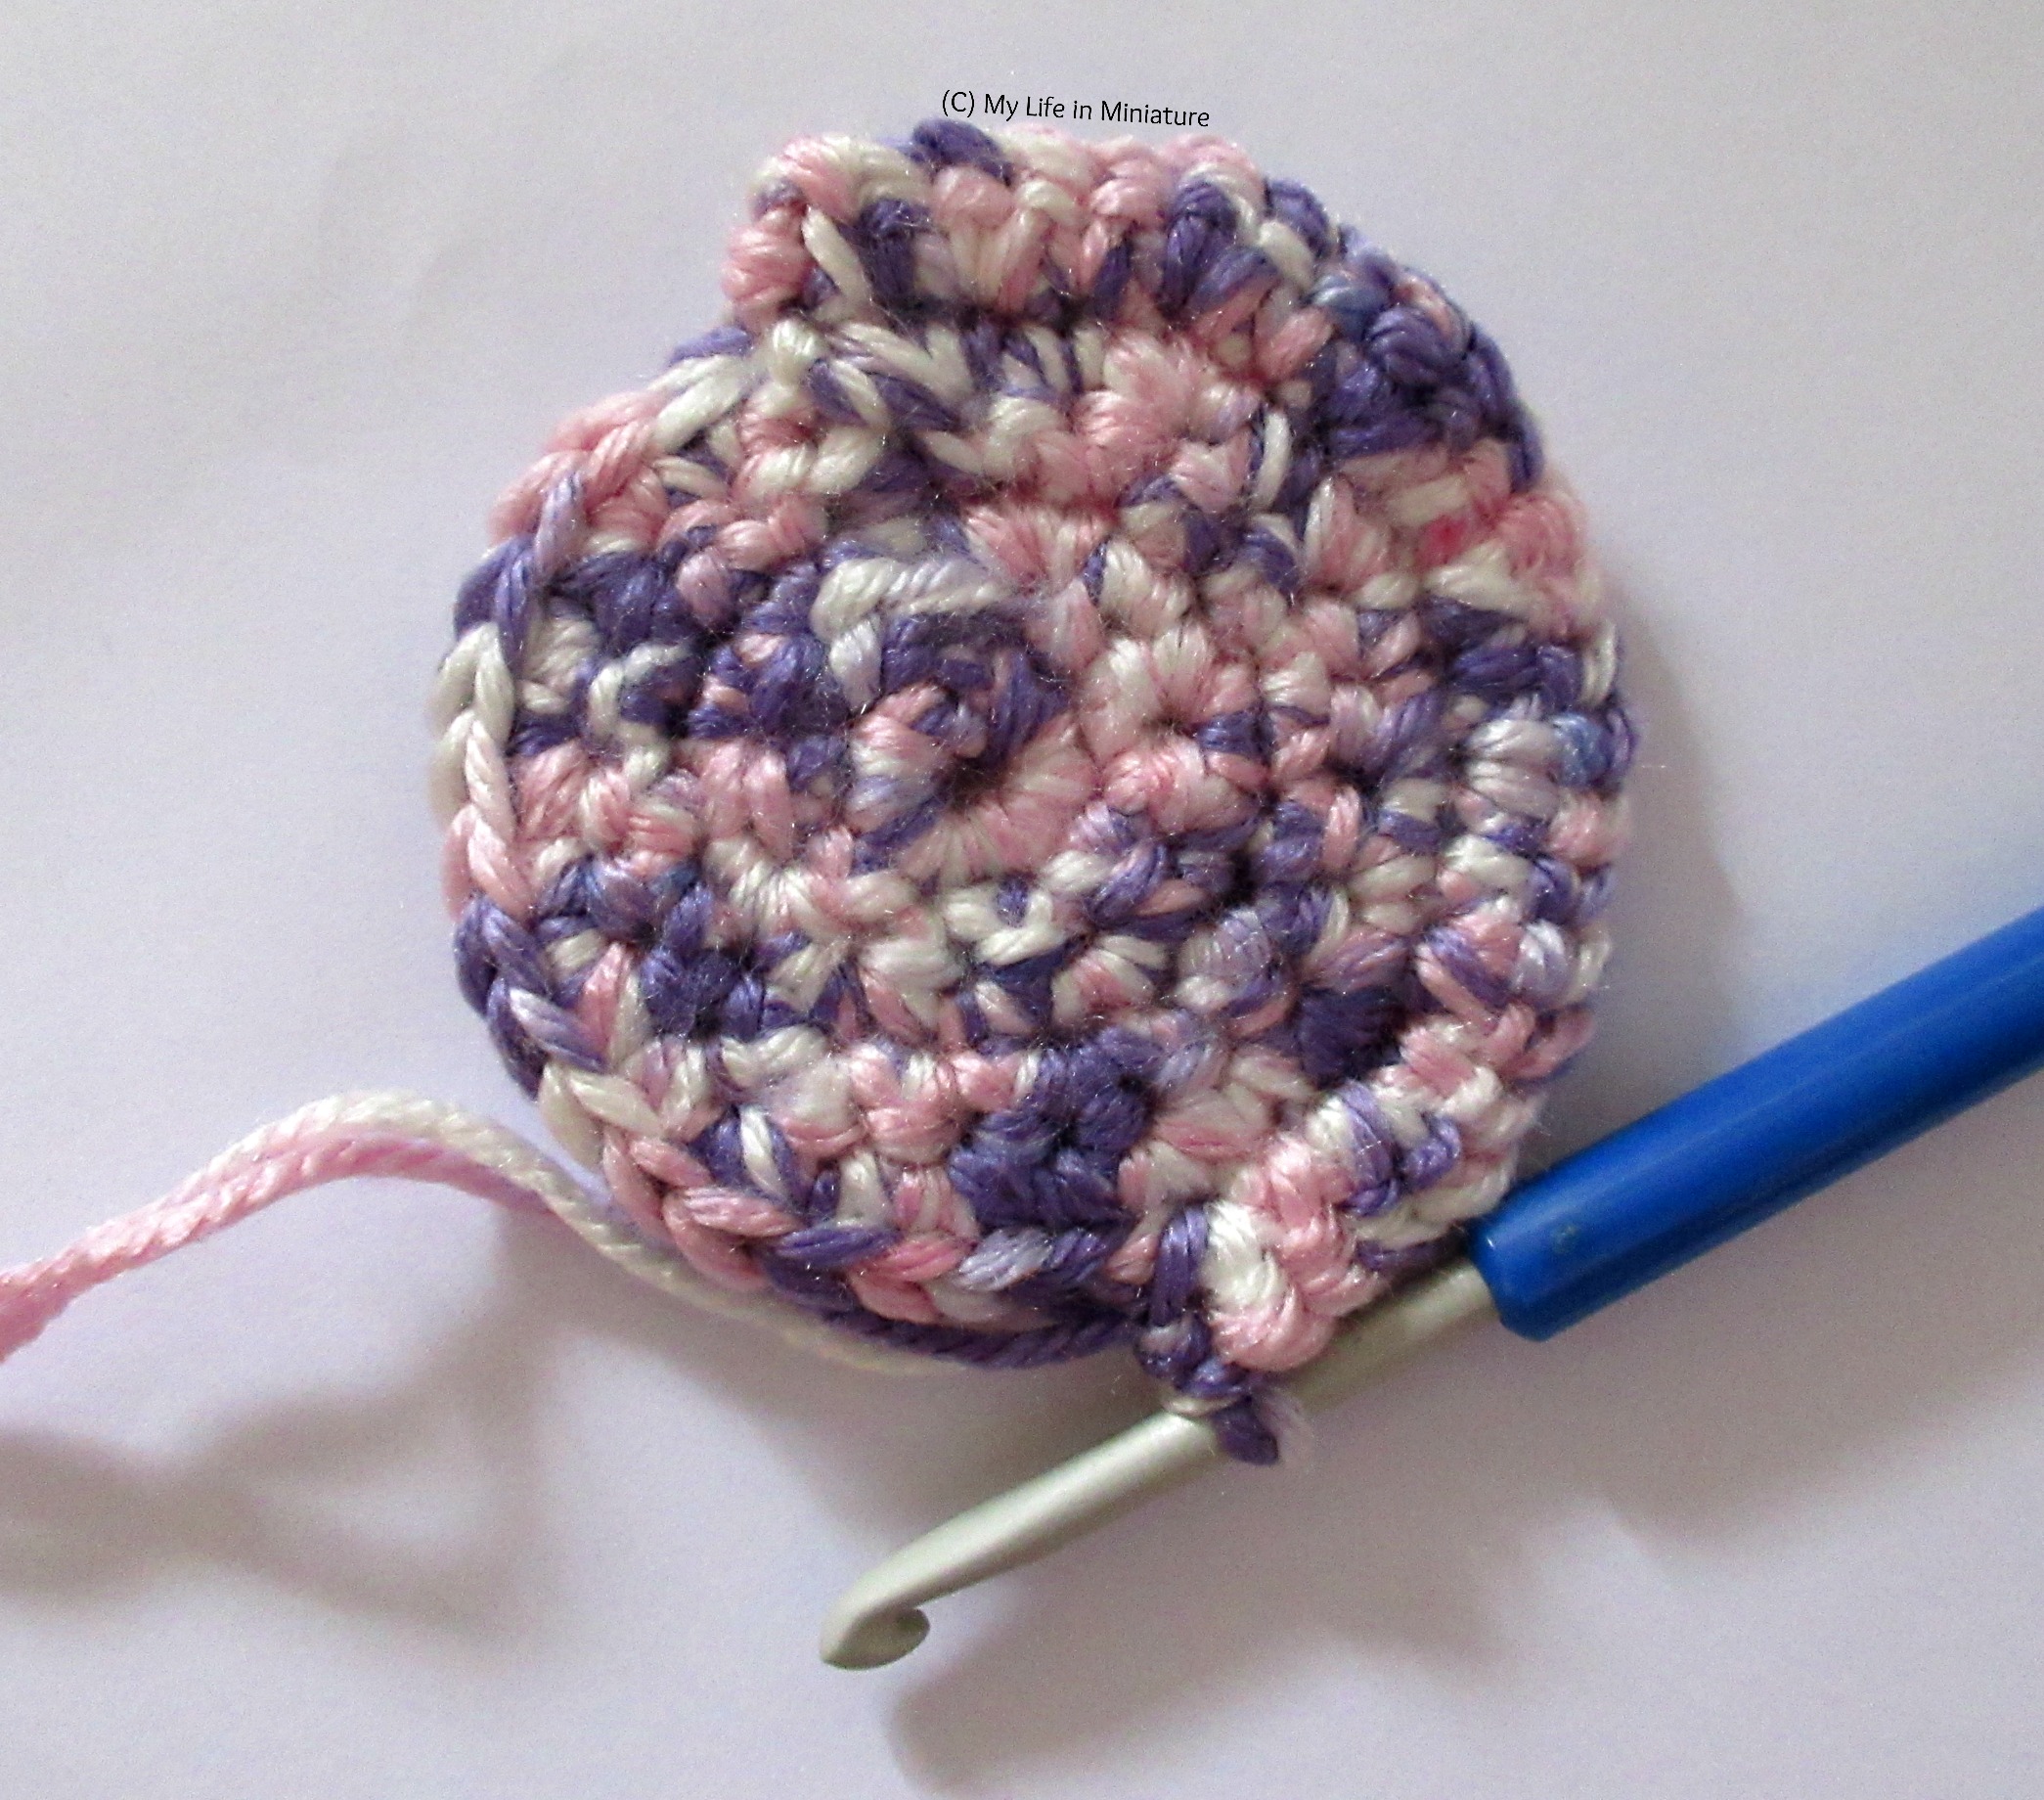 Five-and-a-half rounds of a crochet circle are on a white background. The yarn is pink, purple, and white. 